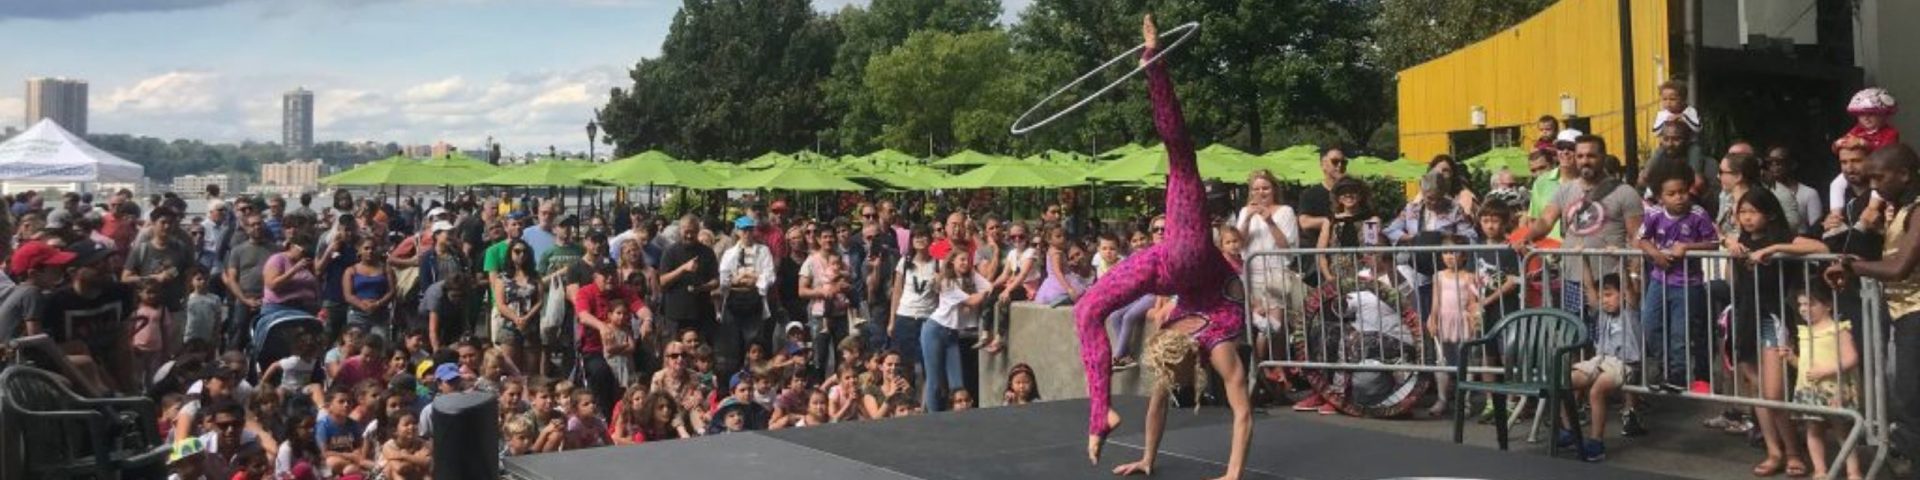 People spectate at an acrobat performance in the Park